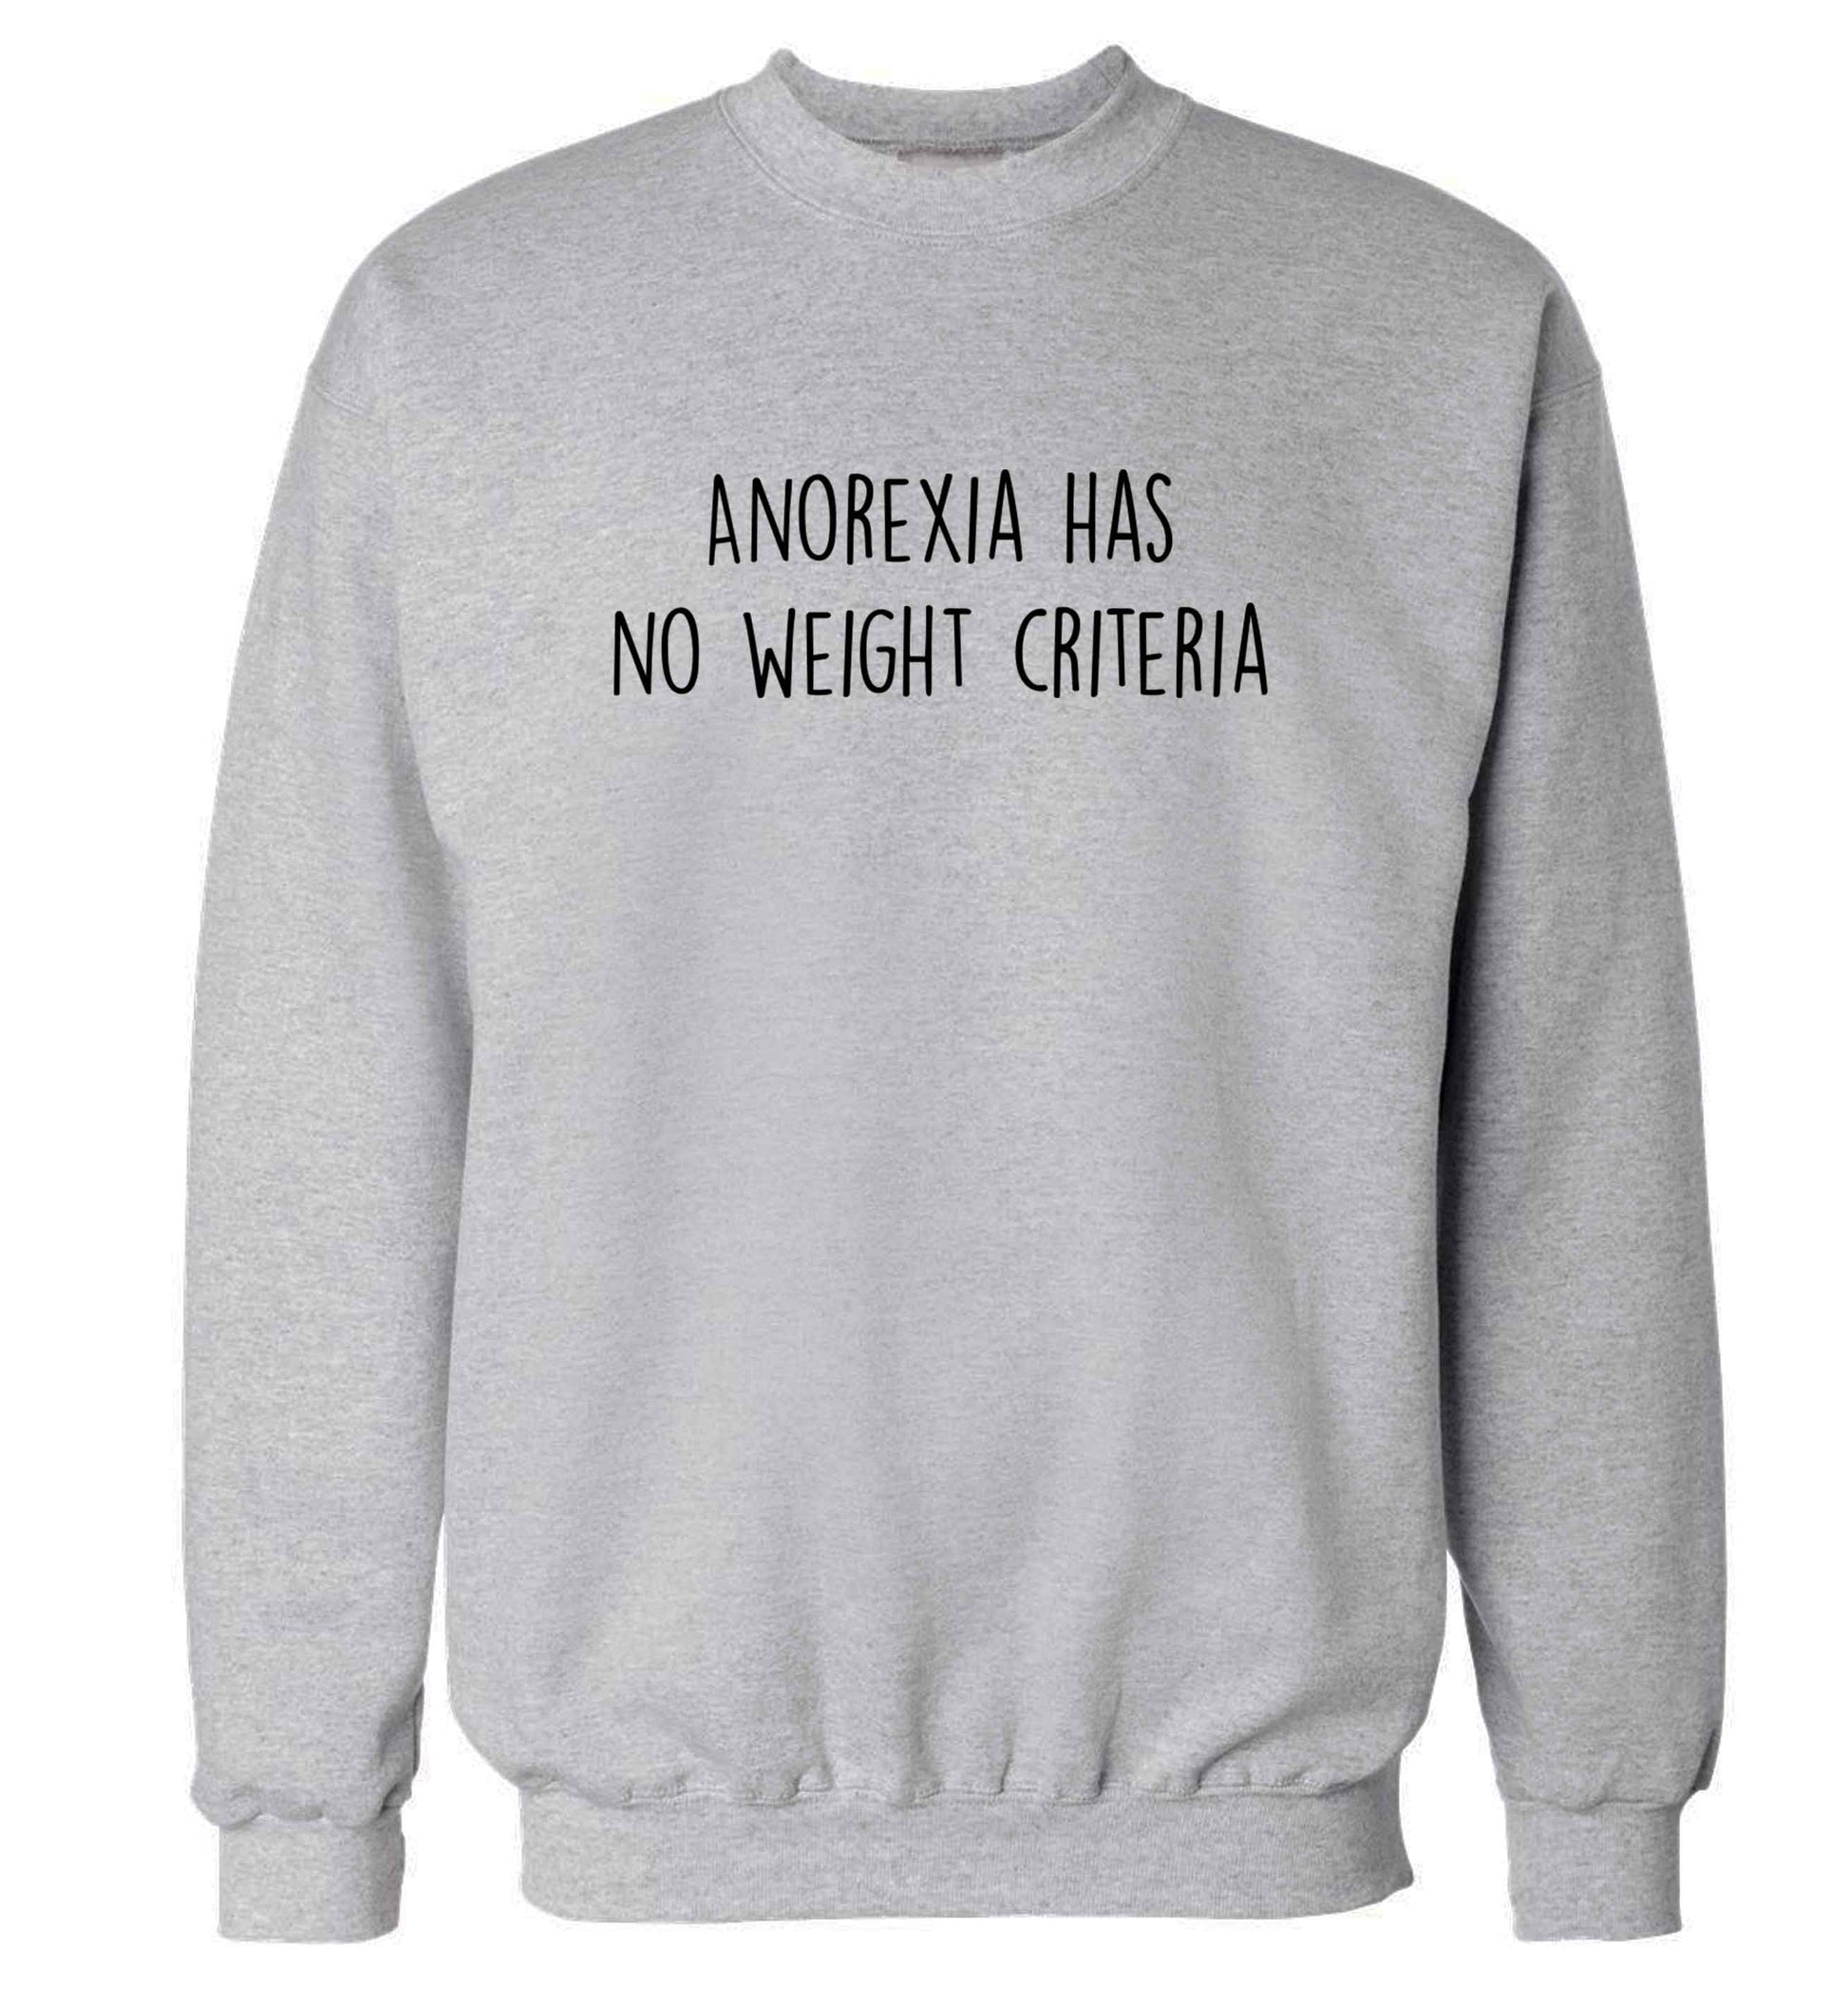 Anorexia has no weight criteria adult's unisex grey sweater 2XL